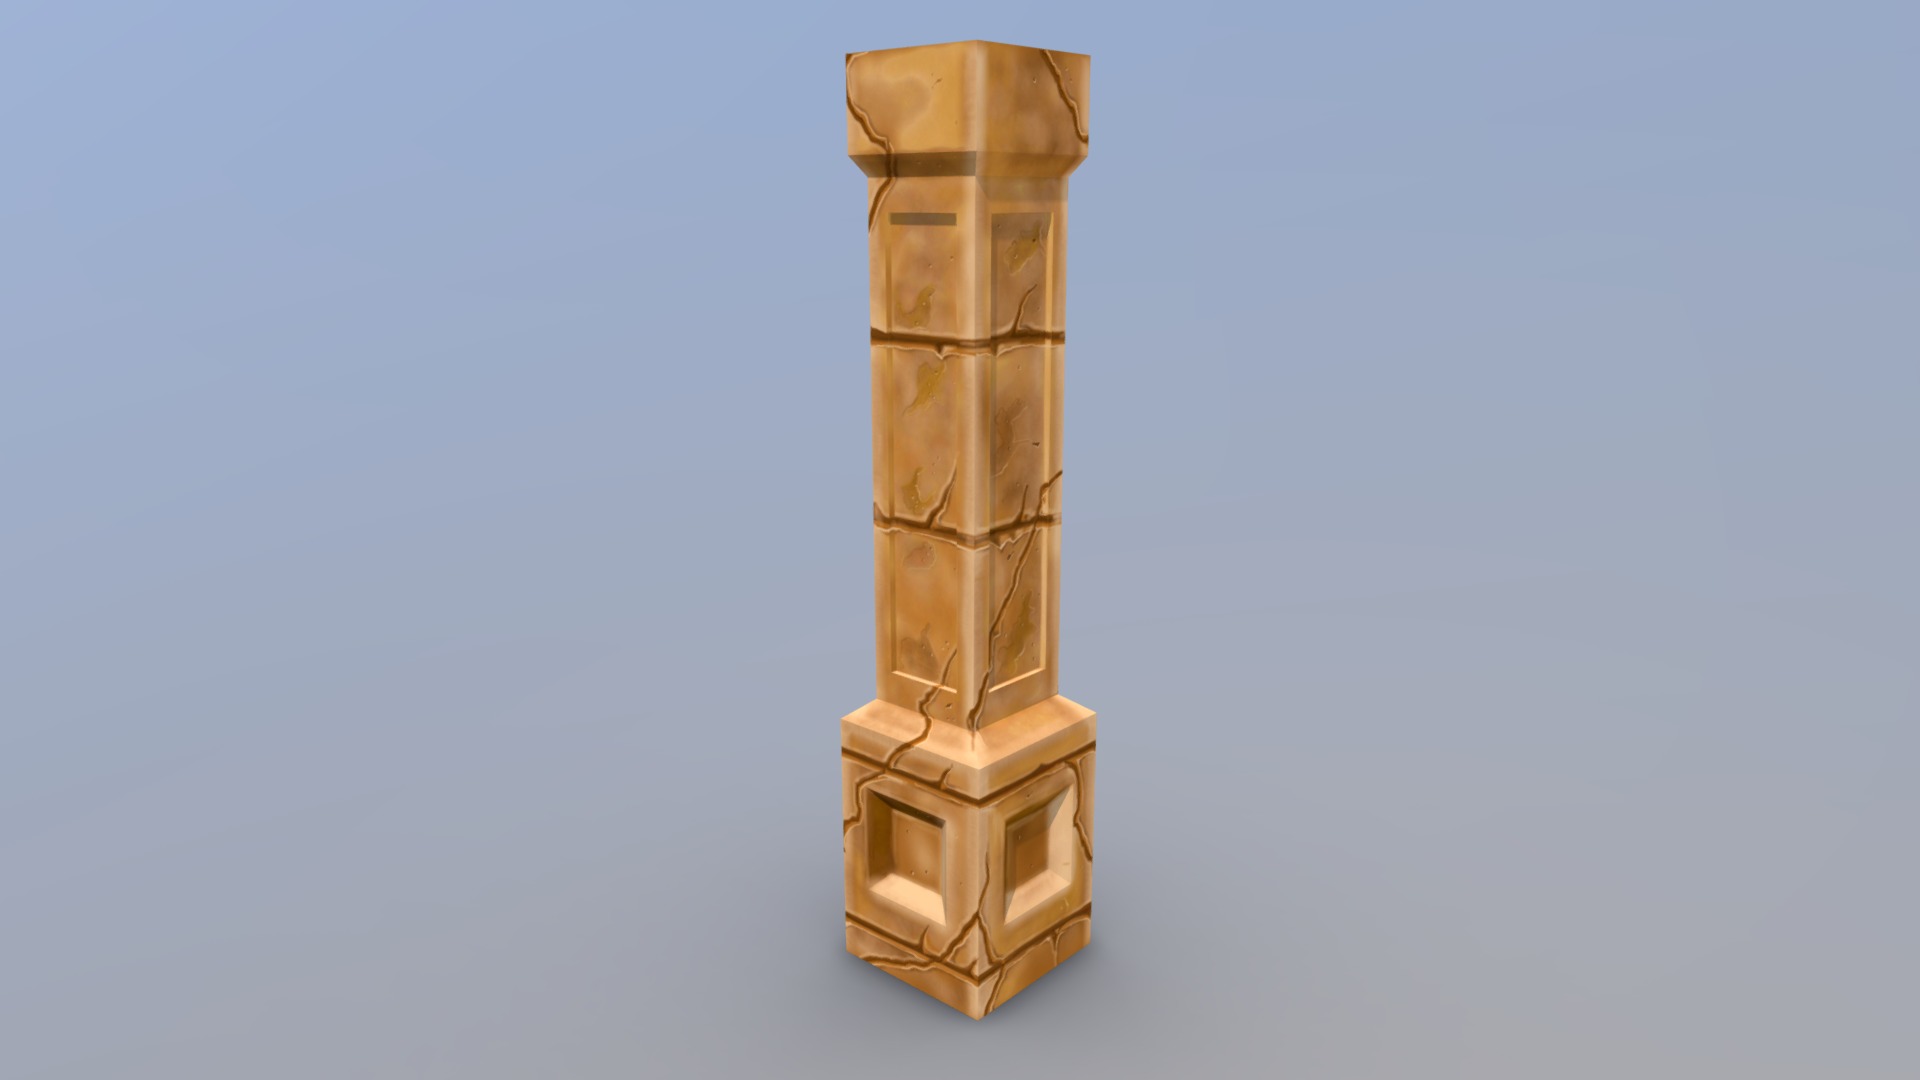 Hi, these are for Pillar Collection art pack for Unity asset store.Work in progress so feel free to critique 3d model